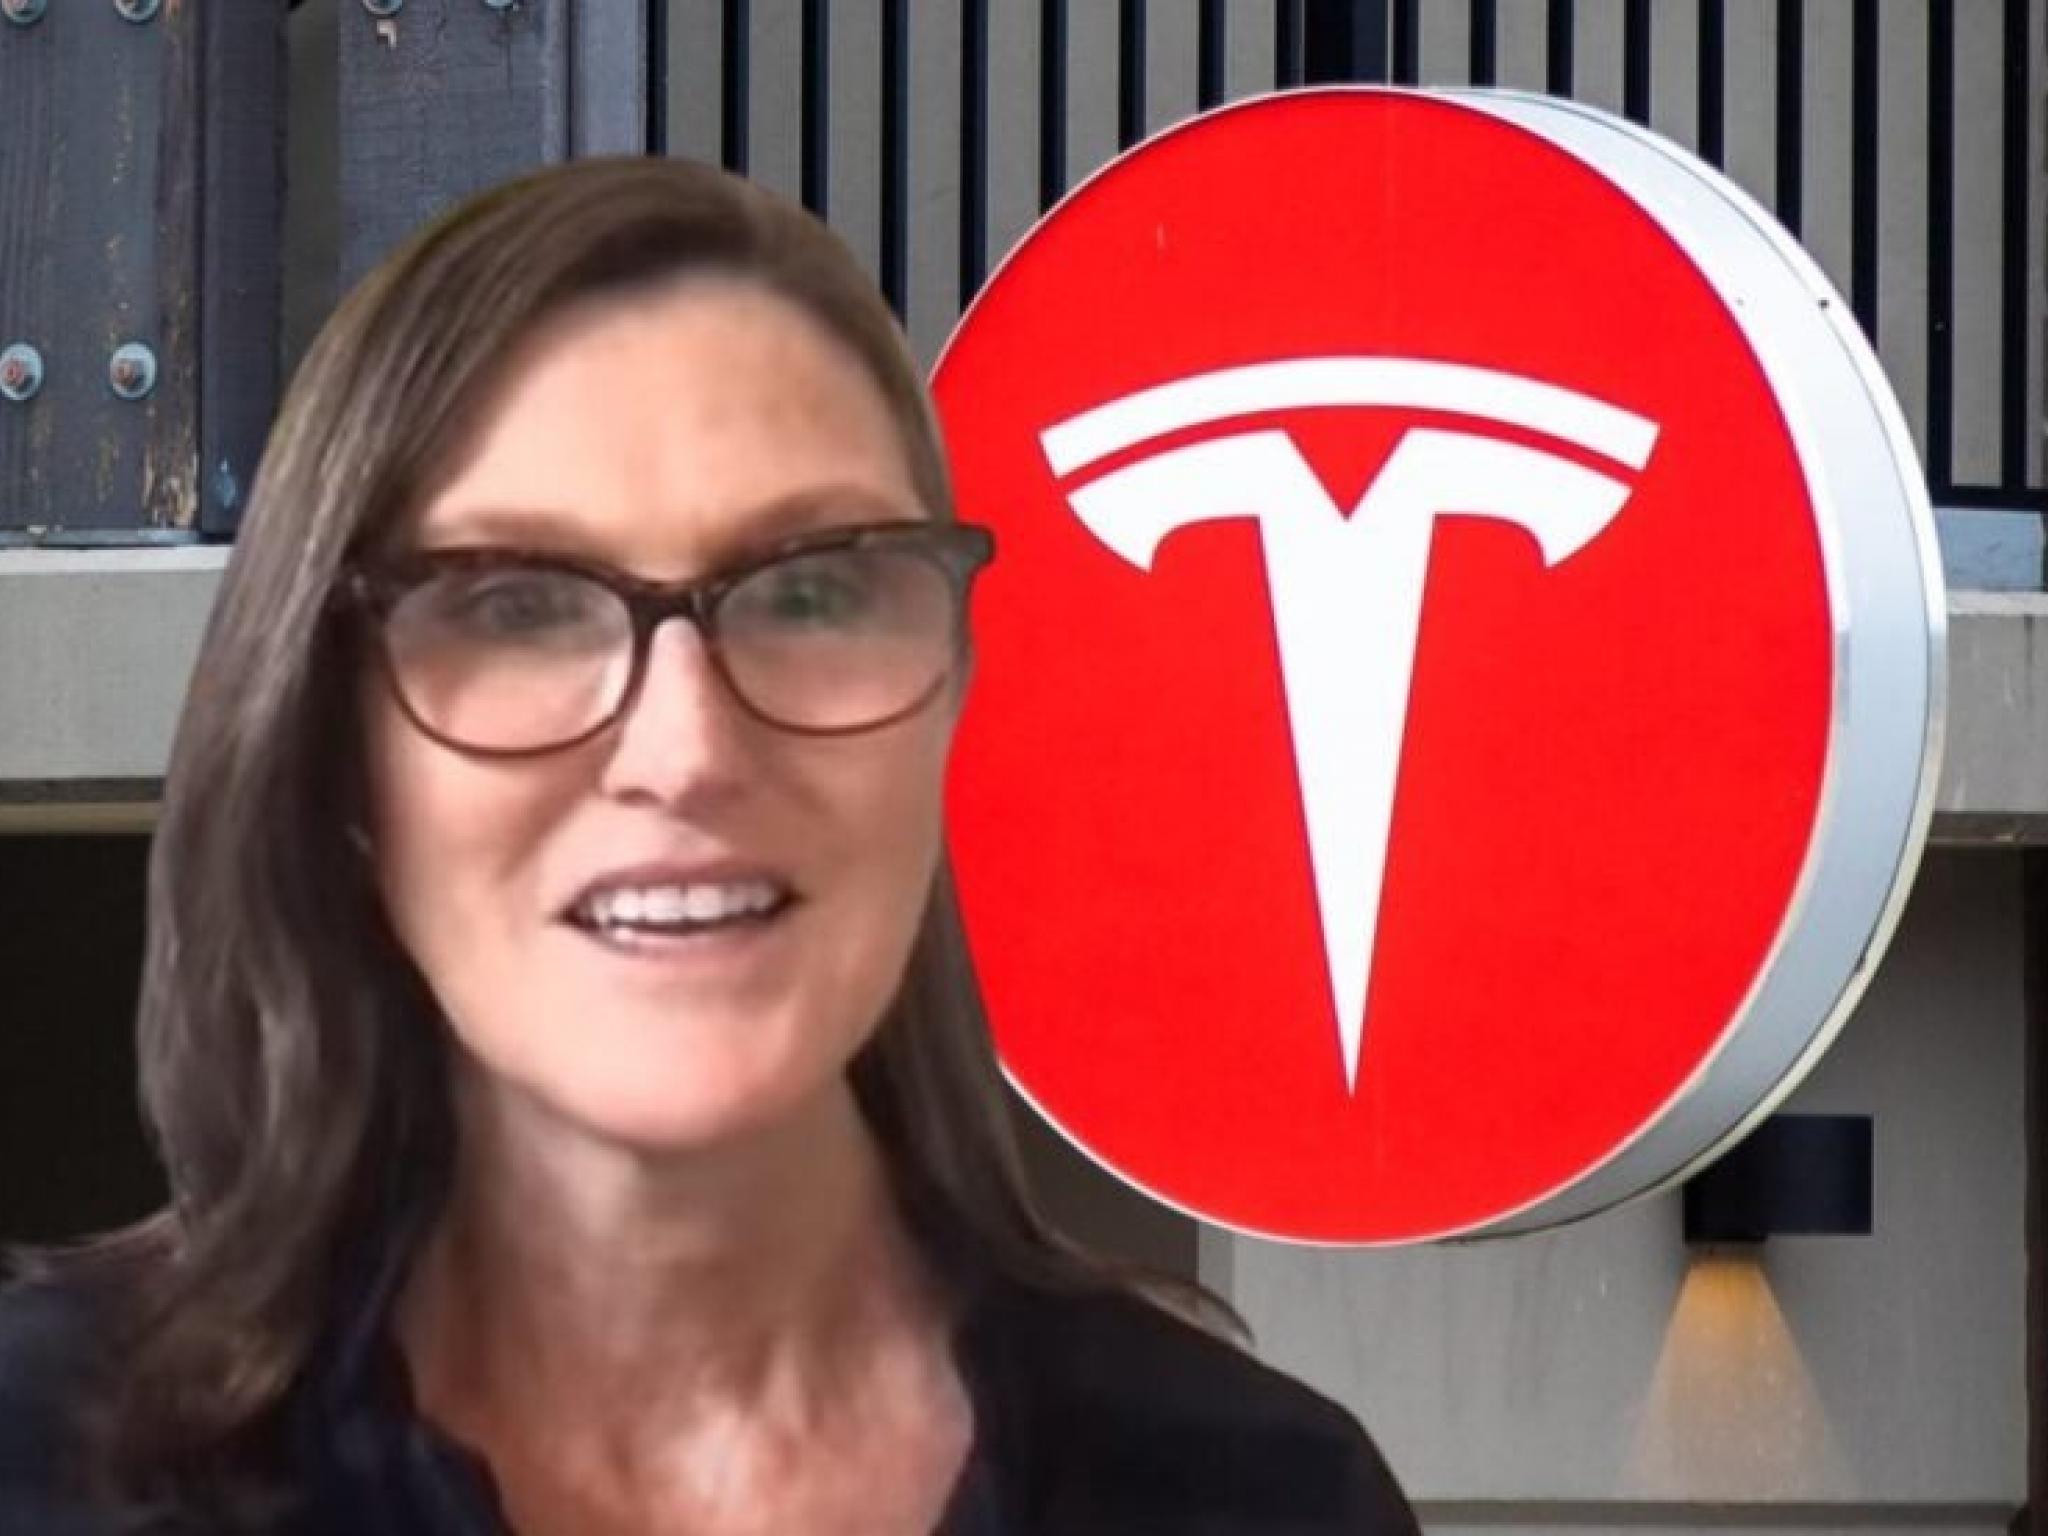  tesla-bull-cathie-woods-ark-invest-buys-716m-worth-of-ev-makers-shares-after-q2-earnings-reveal-profits-tanked-sharply-corrected 